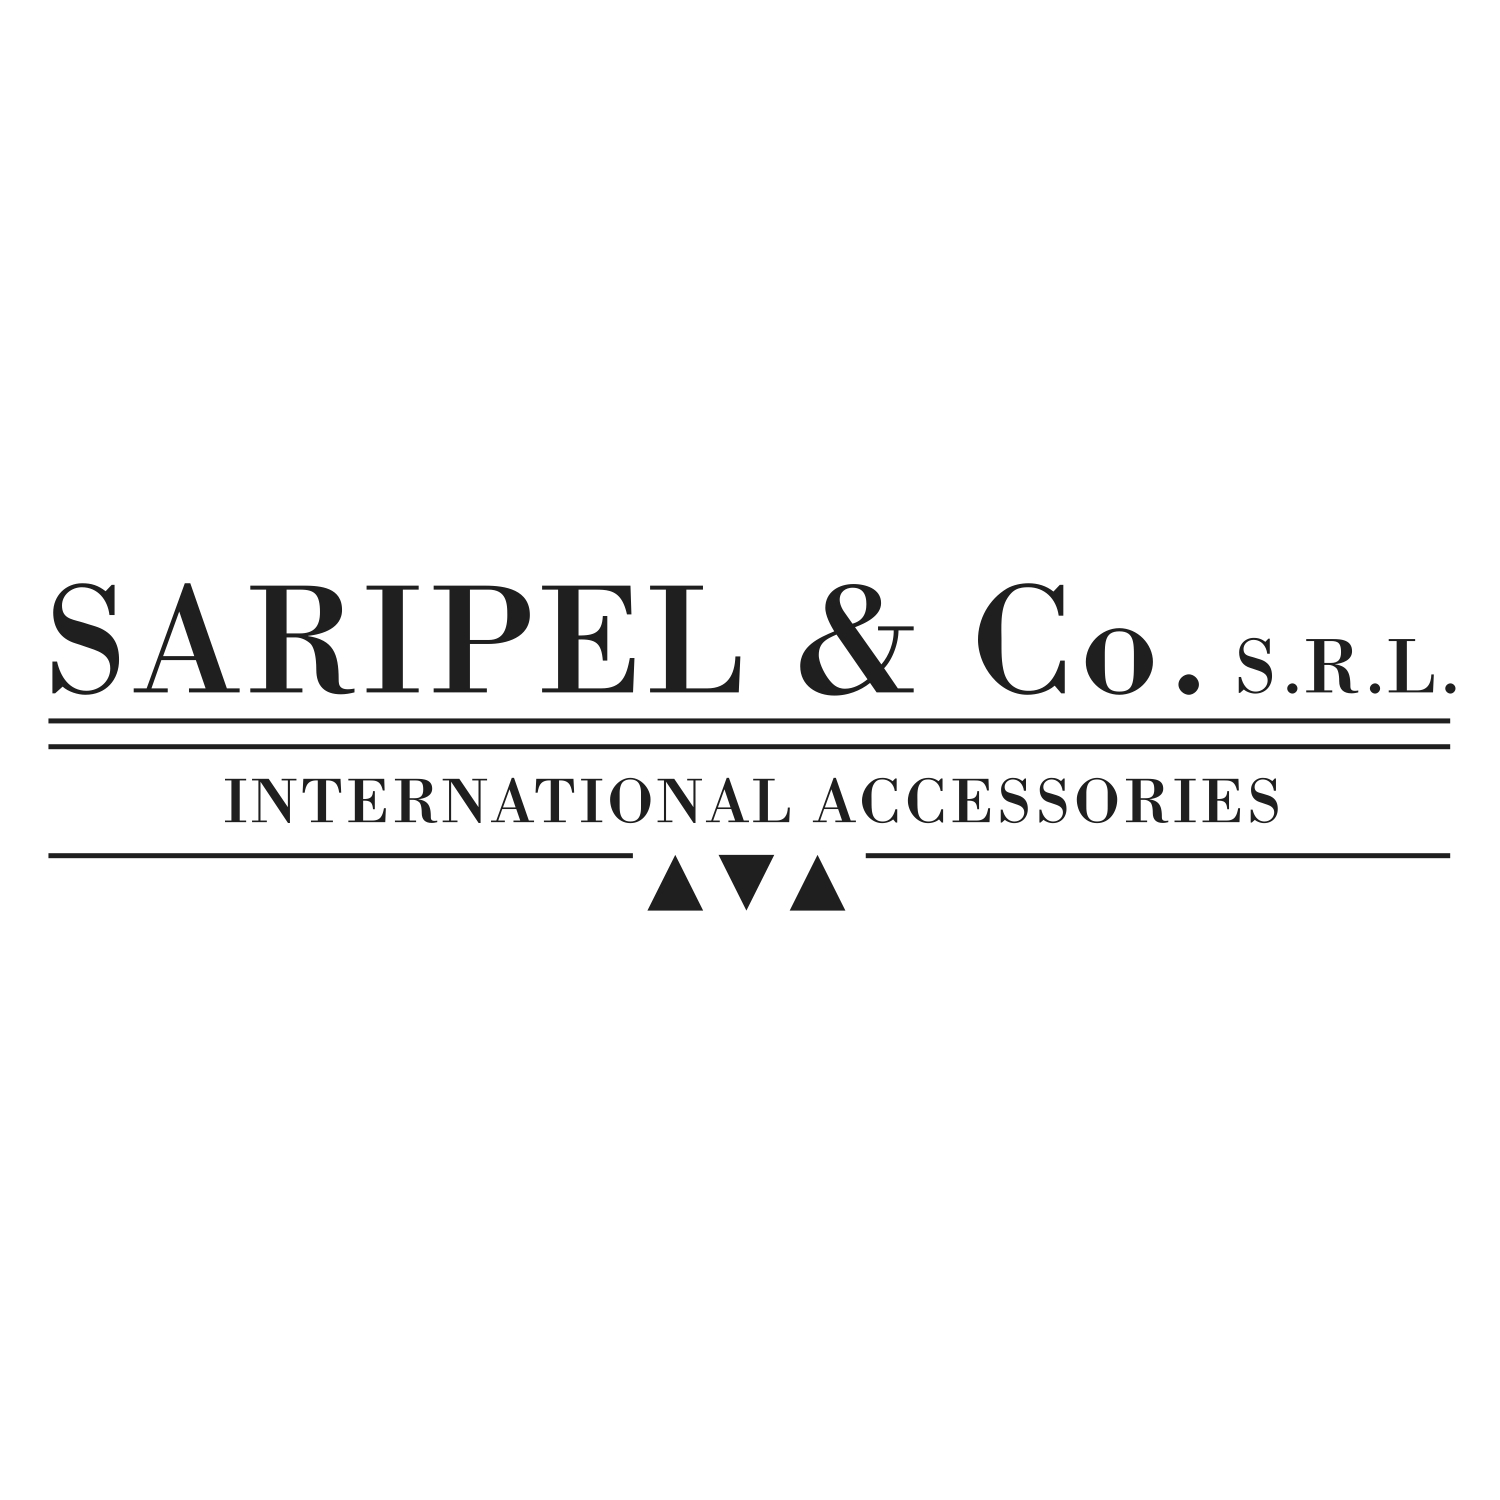 saripel-and-co-leather-goods-manufacturers-montelupo-fiorentino-firenze-profile